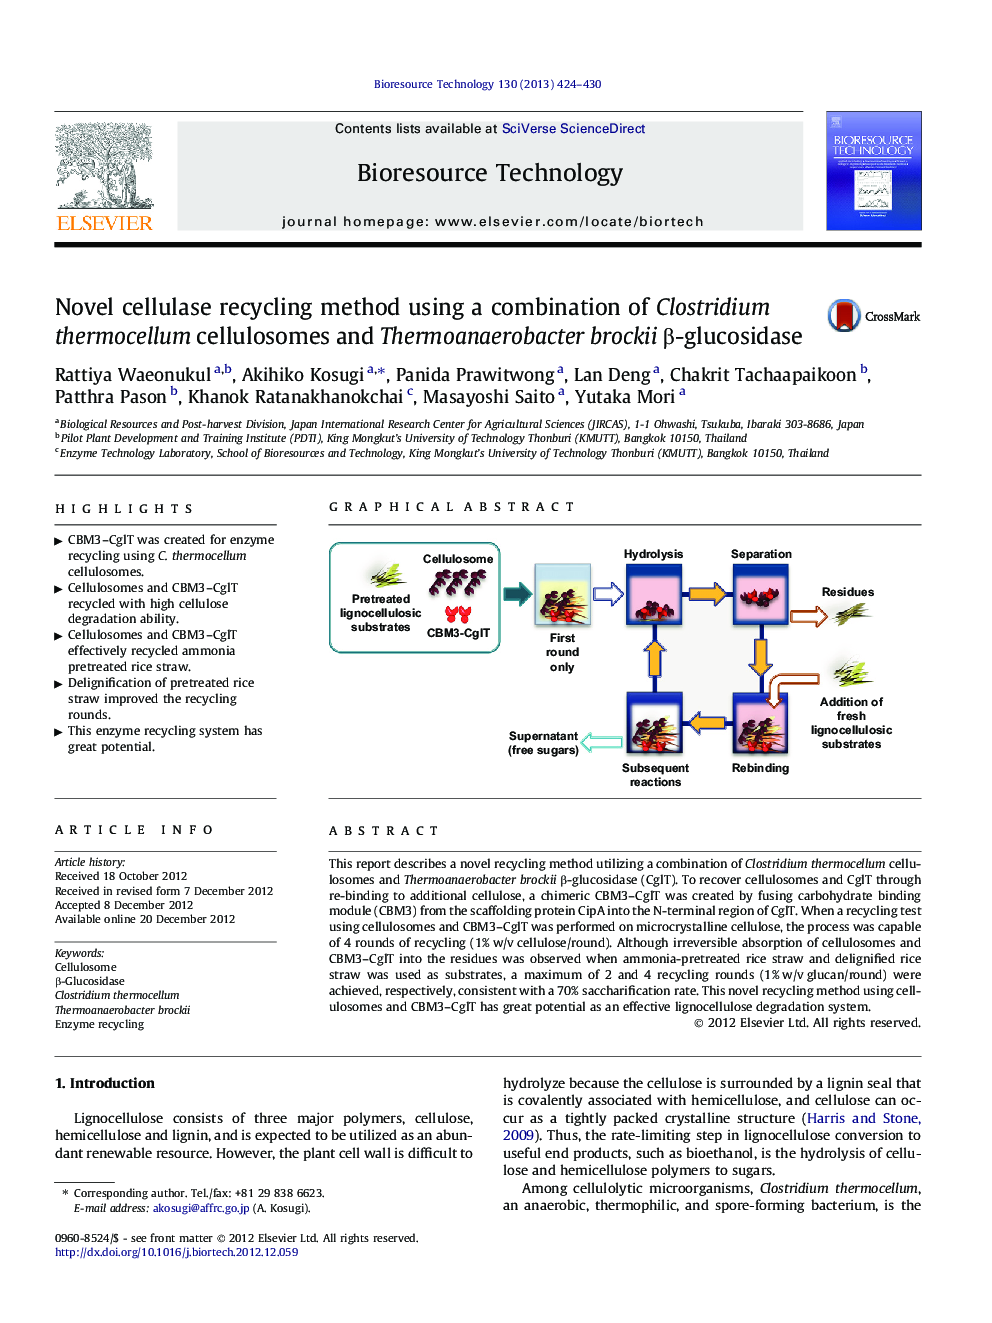 Novel cellulase recycling method using a combination of Clostridium thermocellum cellulosomes and Thermoanaerobacter brockii Î²-glucosidase